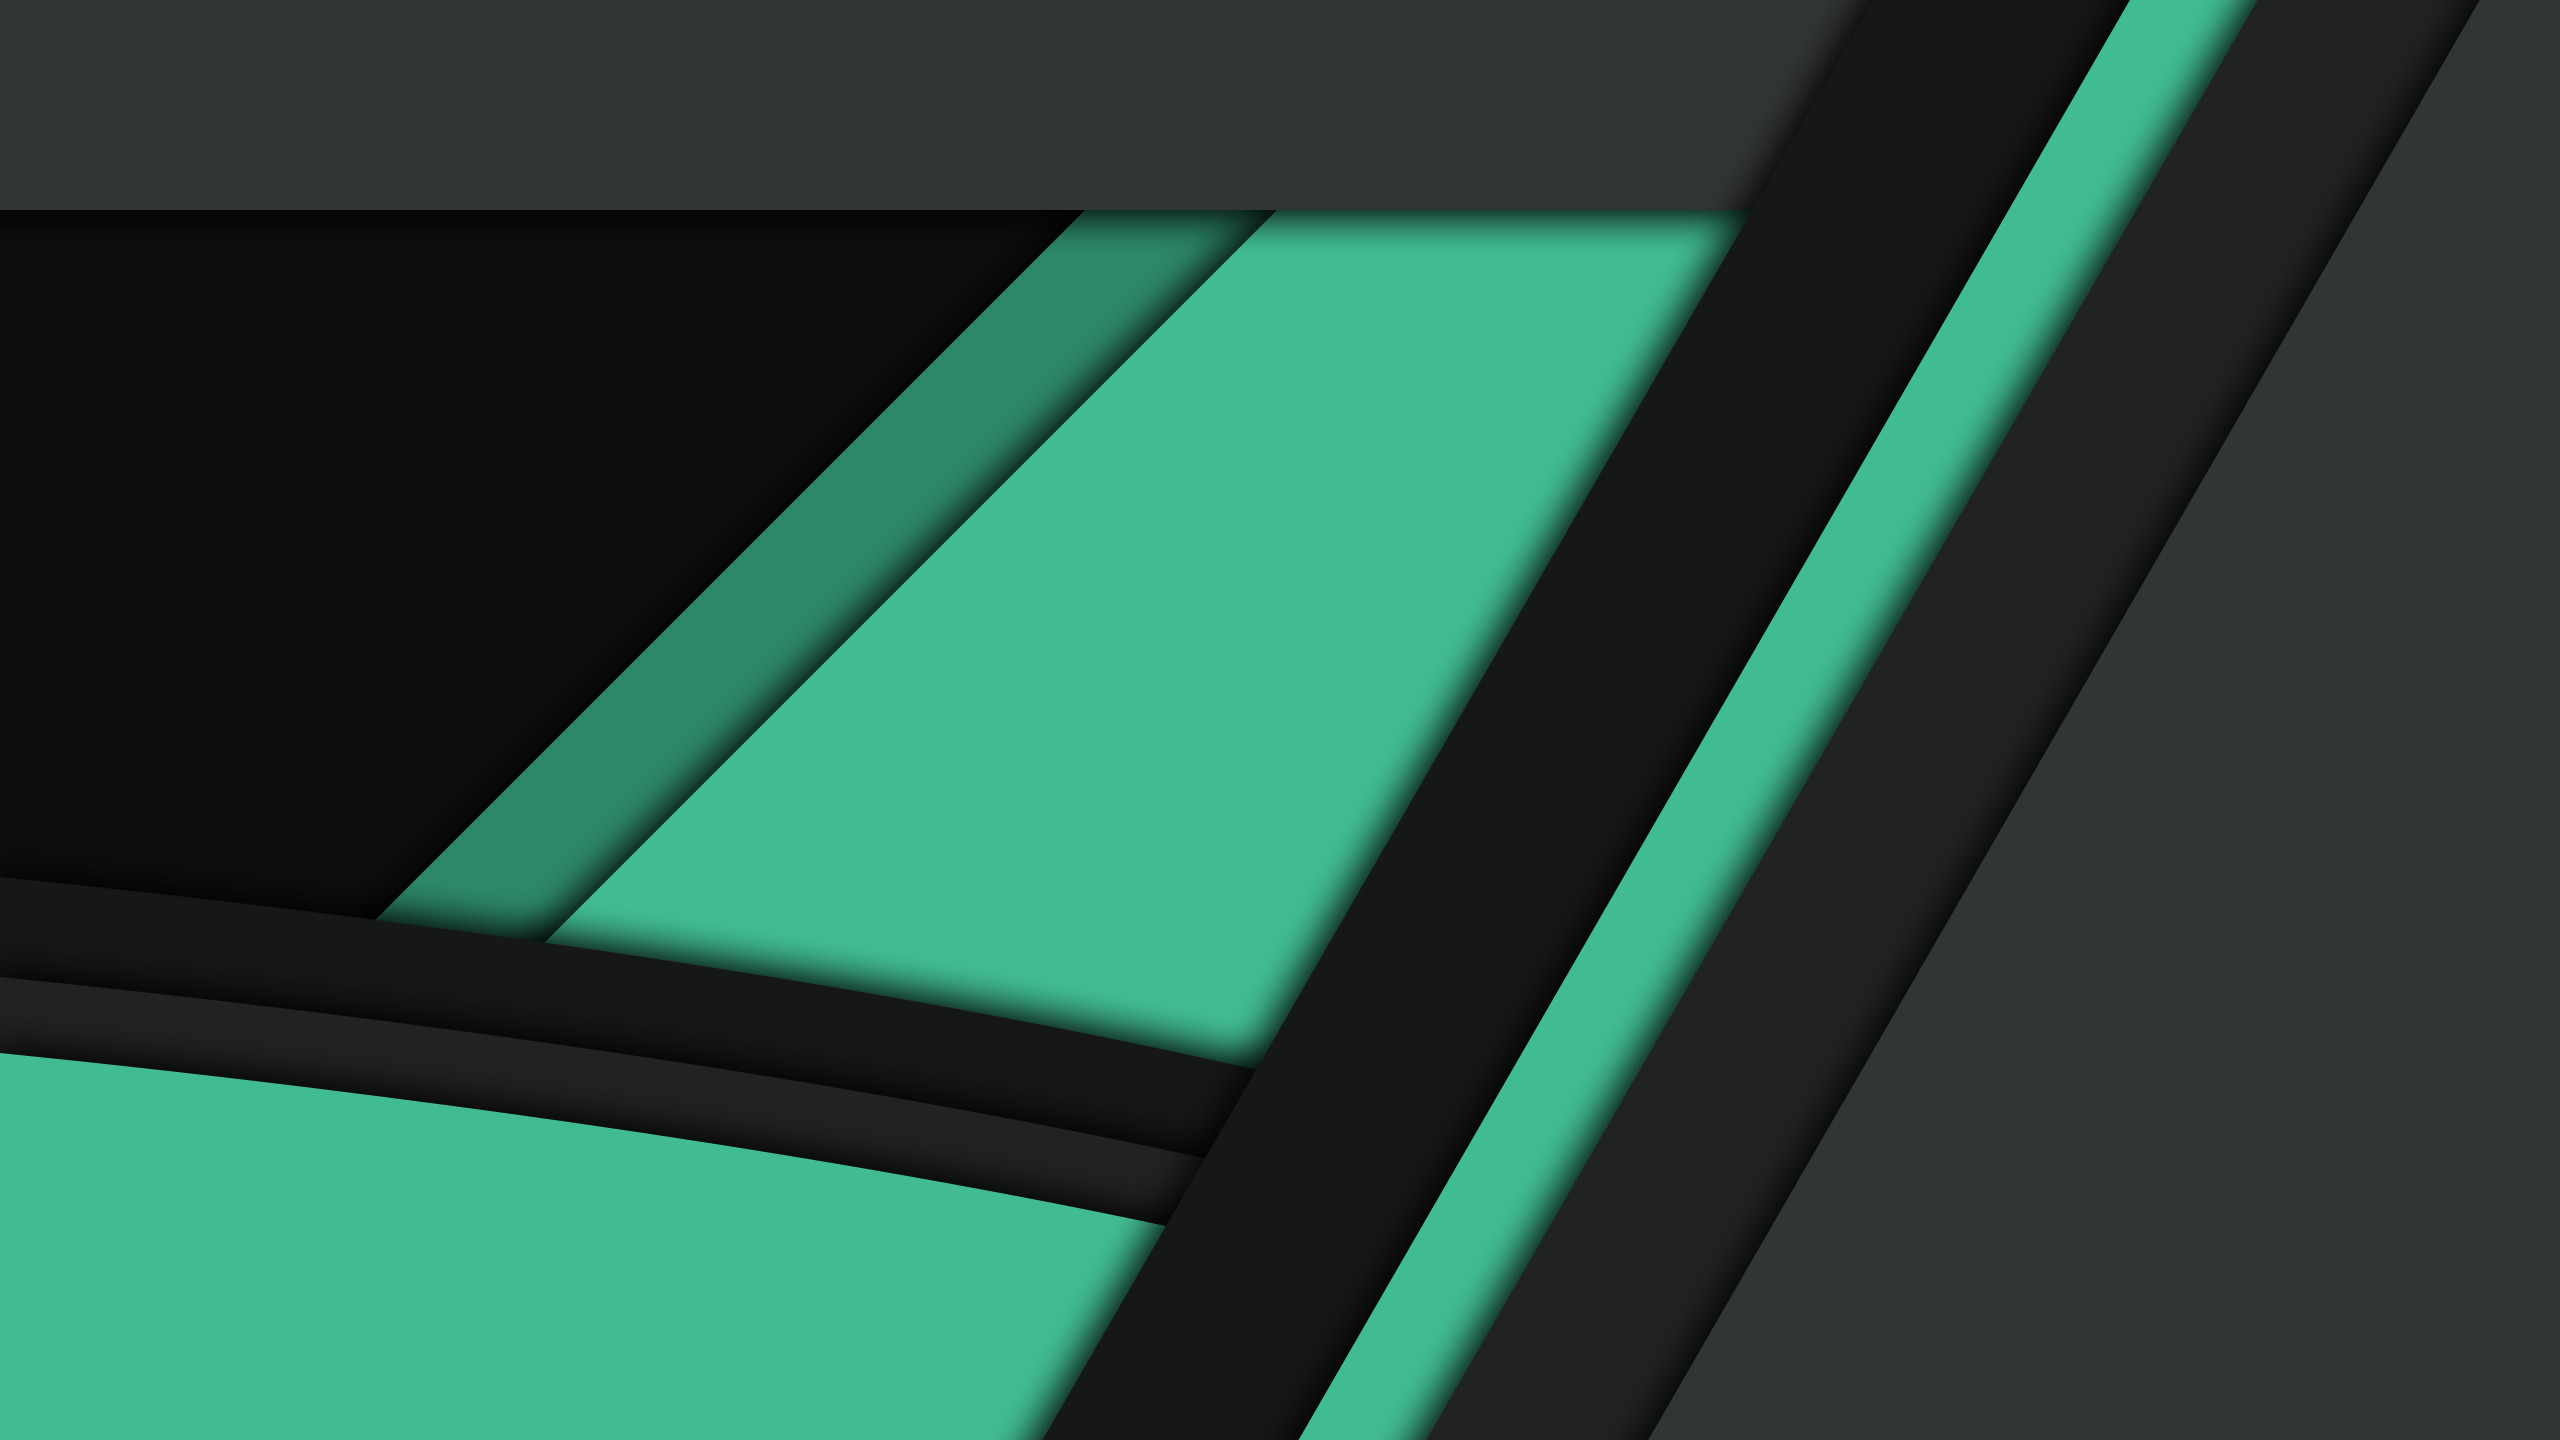 Black Green Material Design, HD Abstract, 4k Wallpapers ...